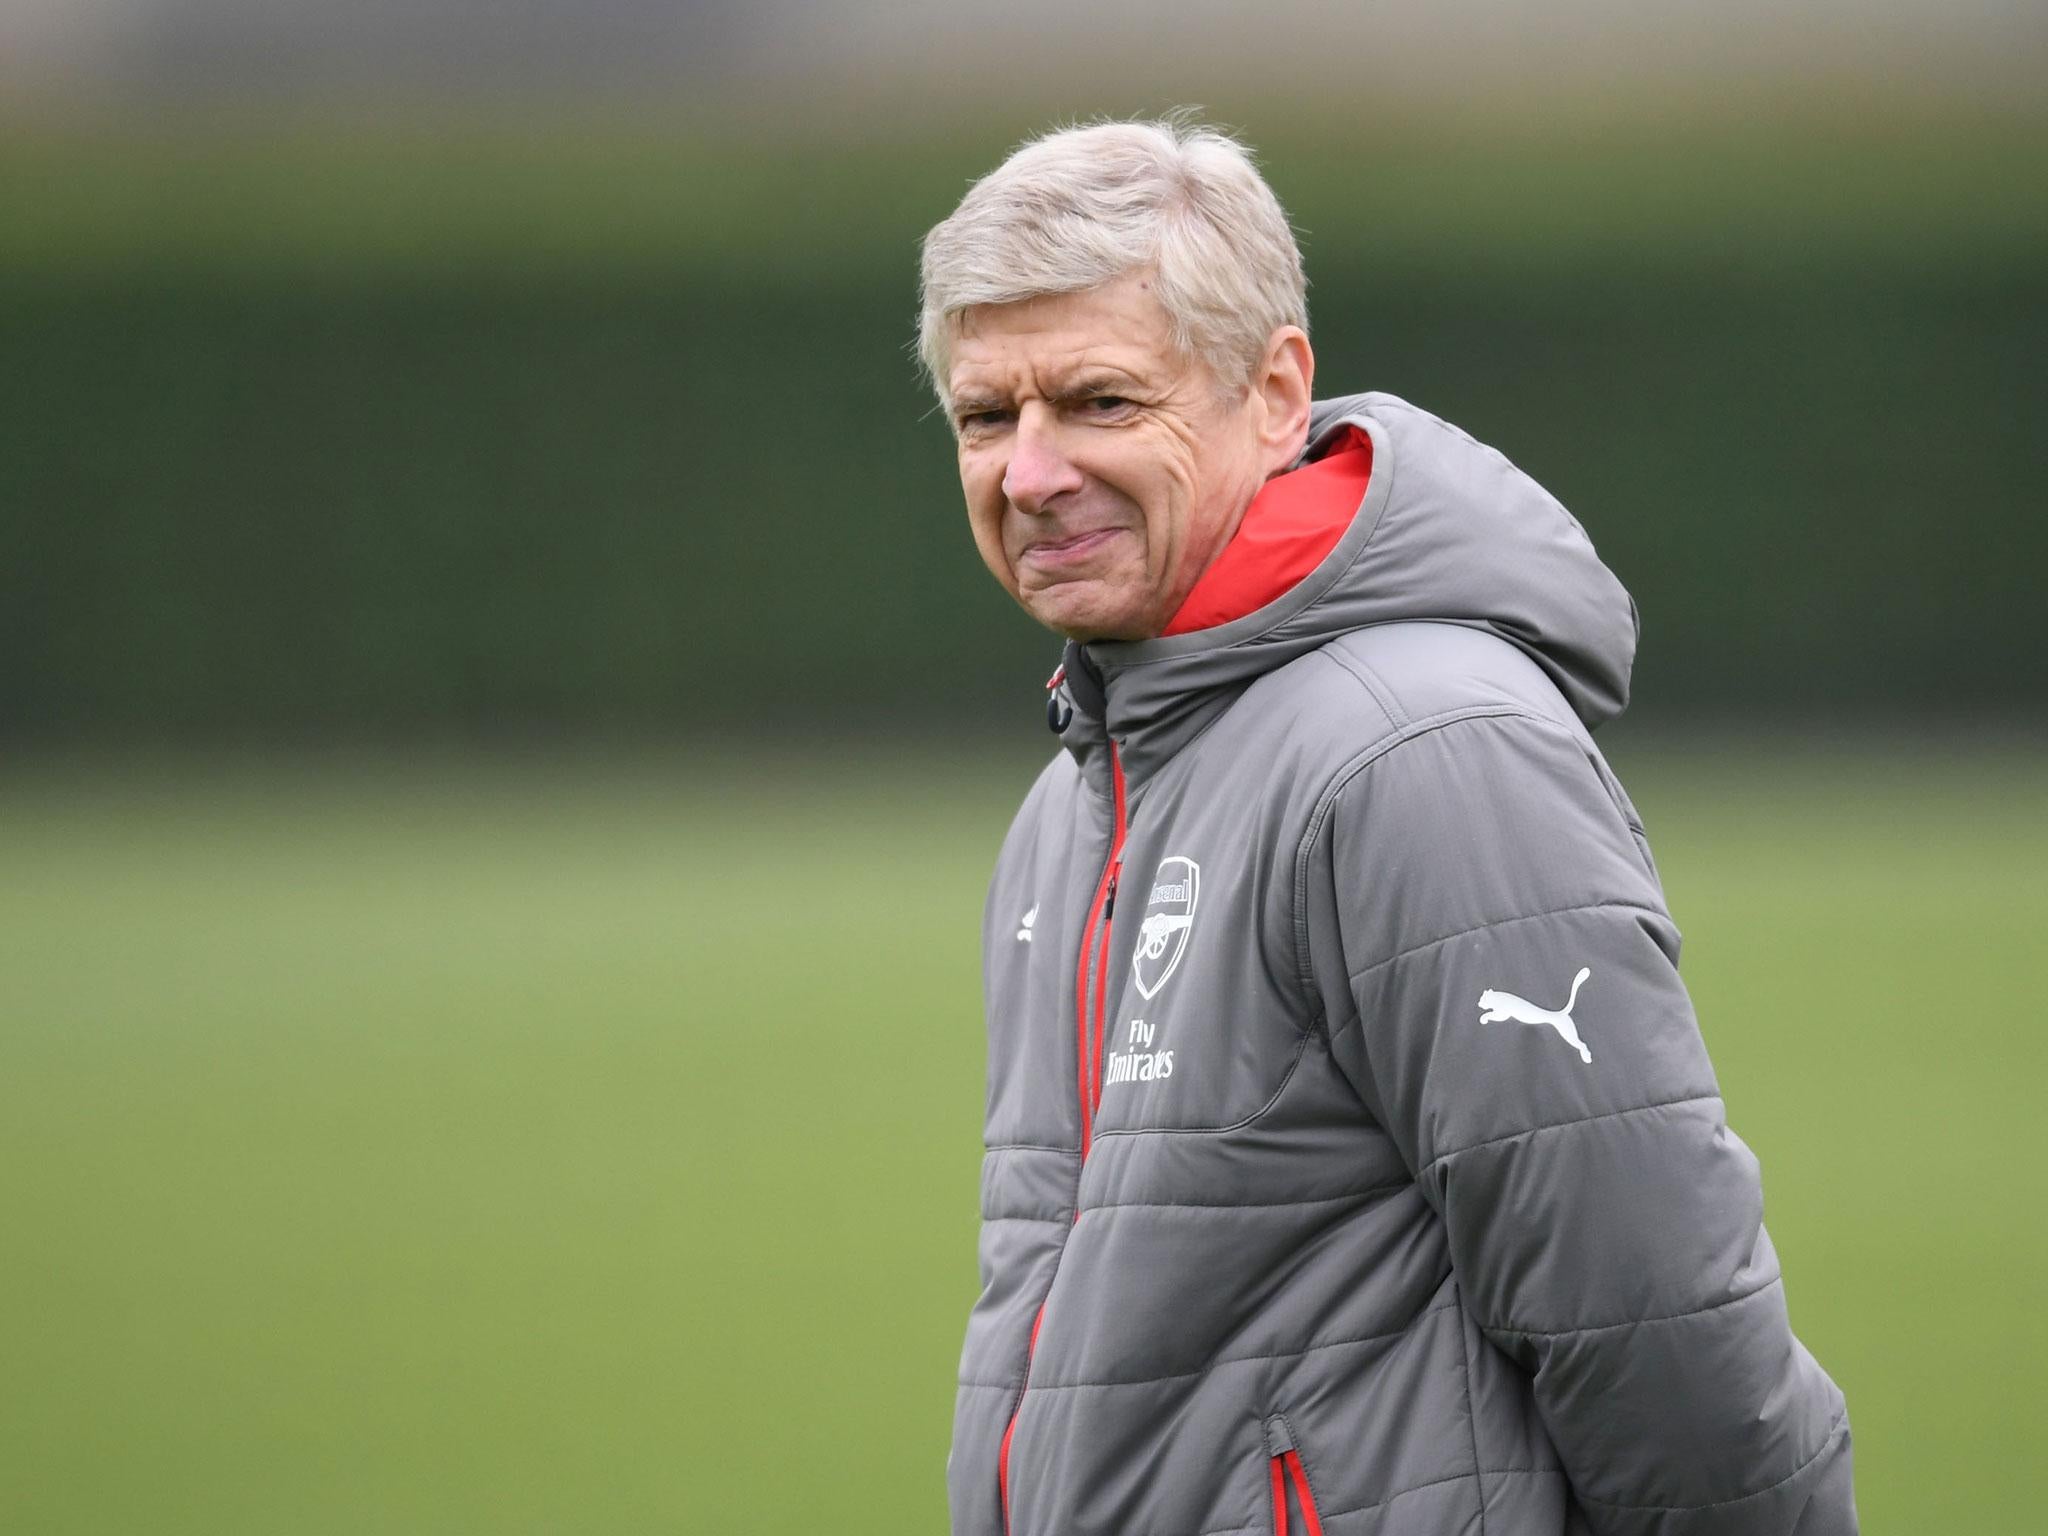 'We had never so many players who could perform and score goals – certainly never,' Wenger said